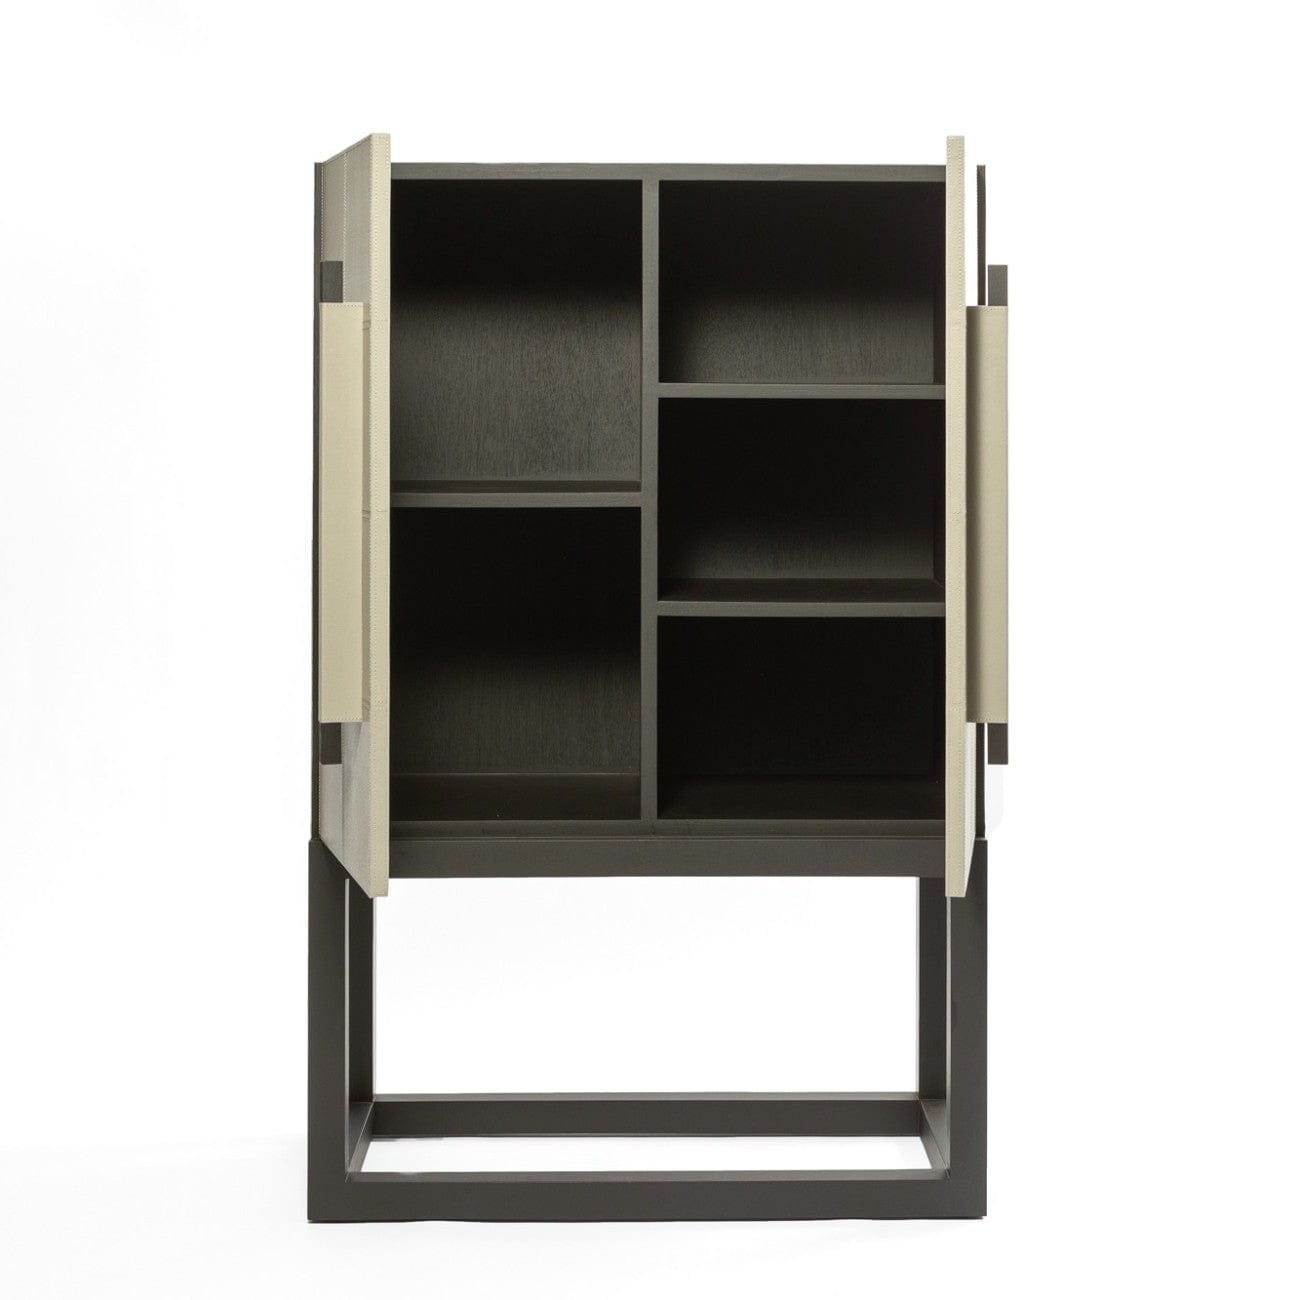 Eccotrading Design London Living Linea Nera Armoire French Grey Leather House of Isabella UK